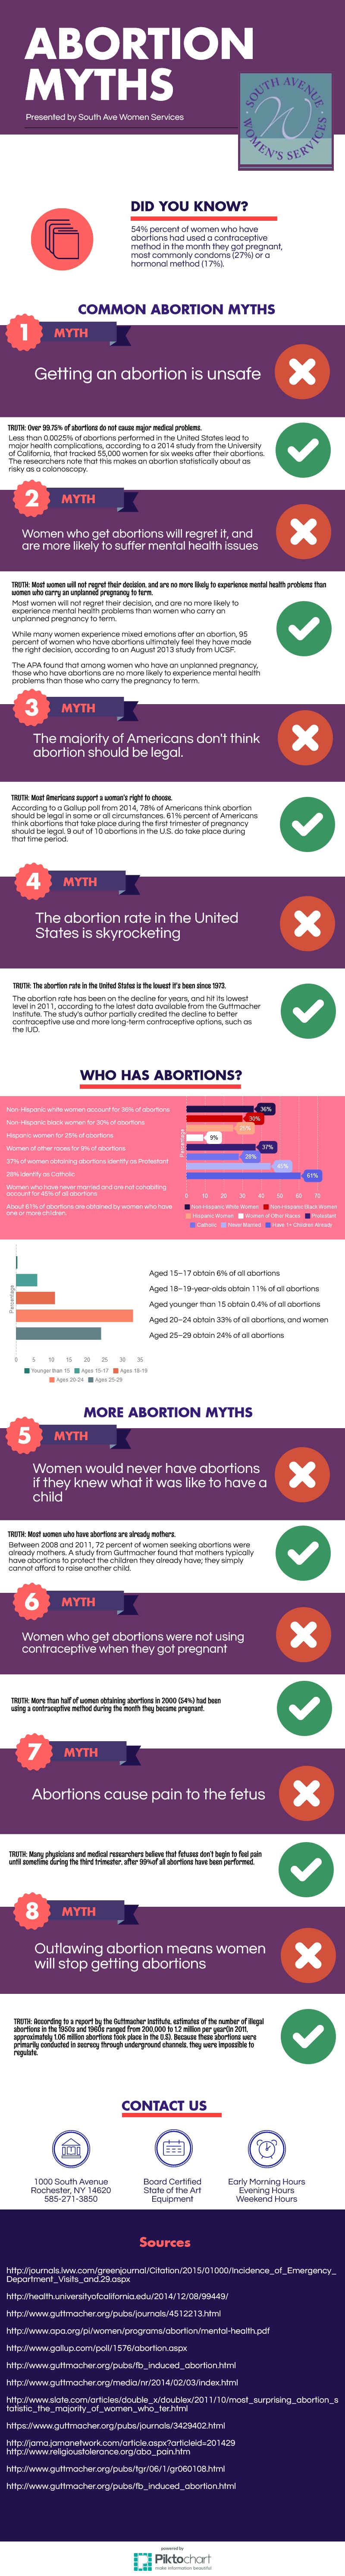 abortion myths infographic